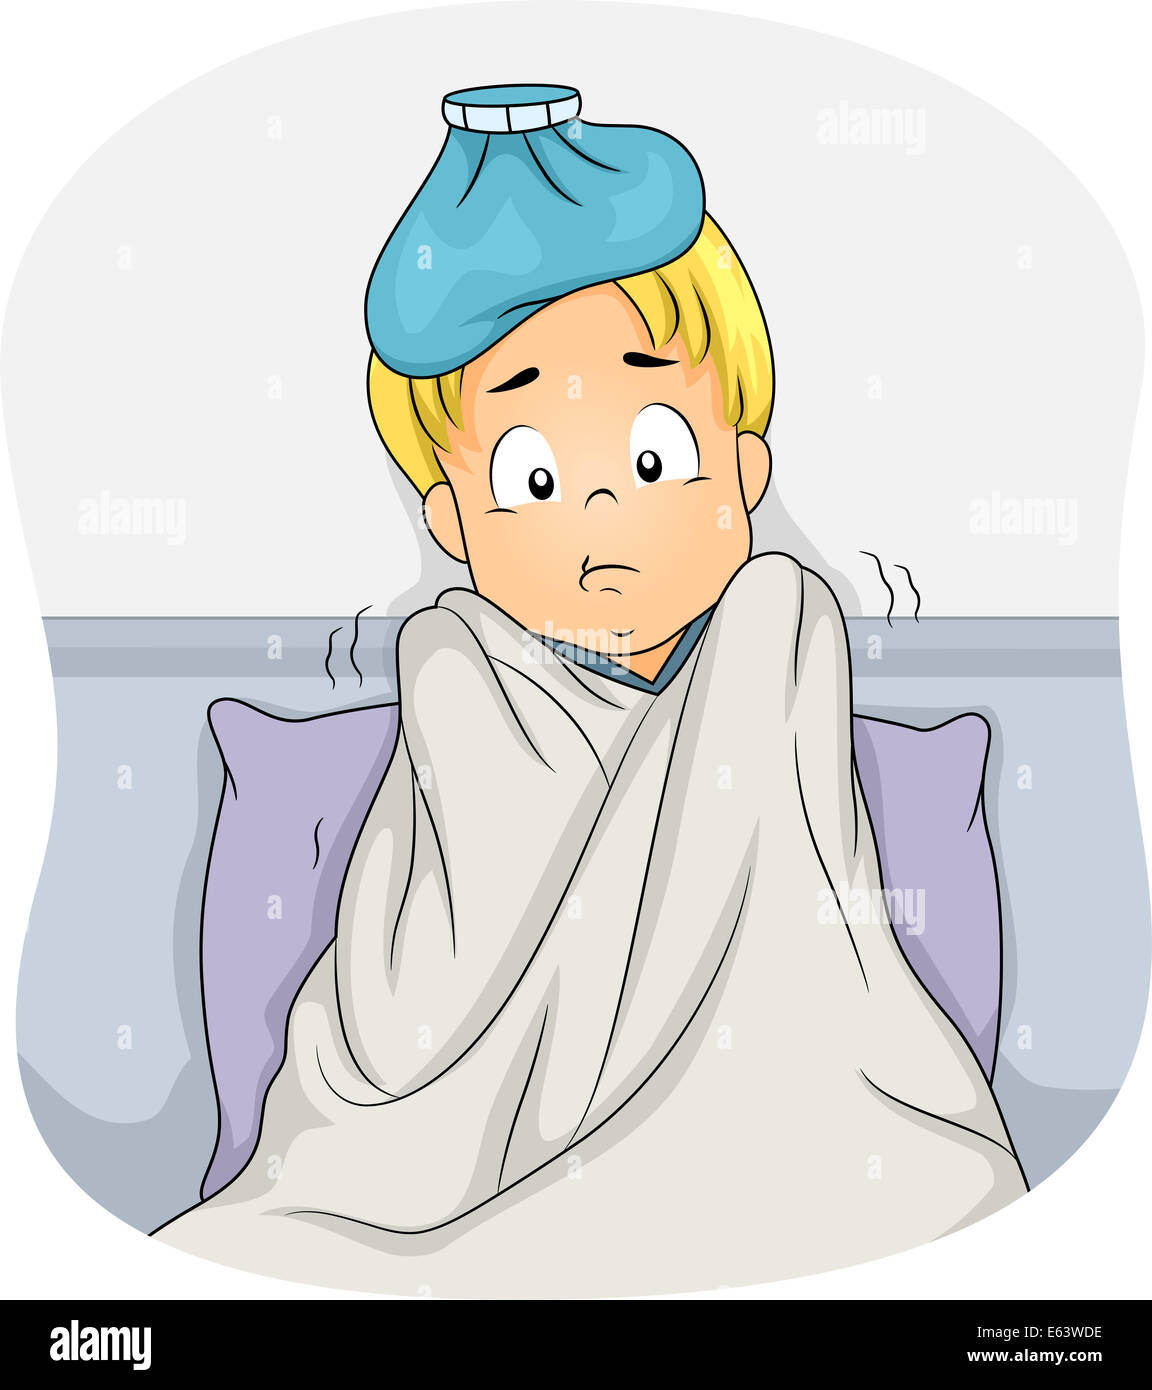 Illustration of a Boy Lying in Bed Due to Fever Stock Photo